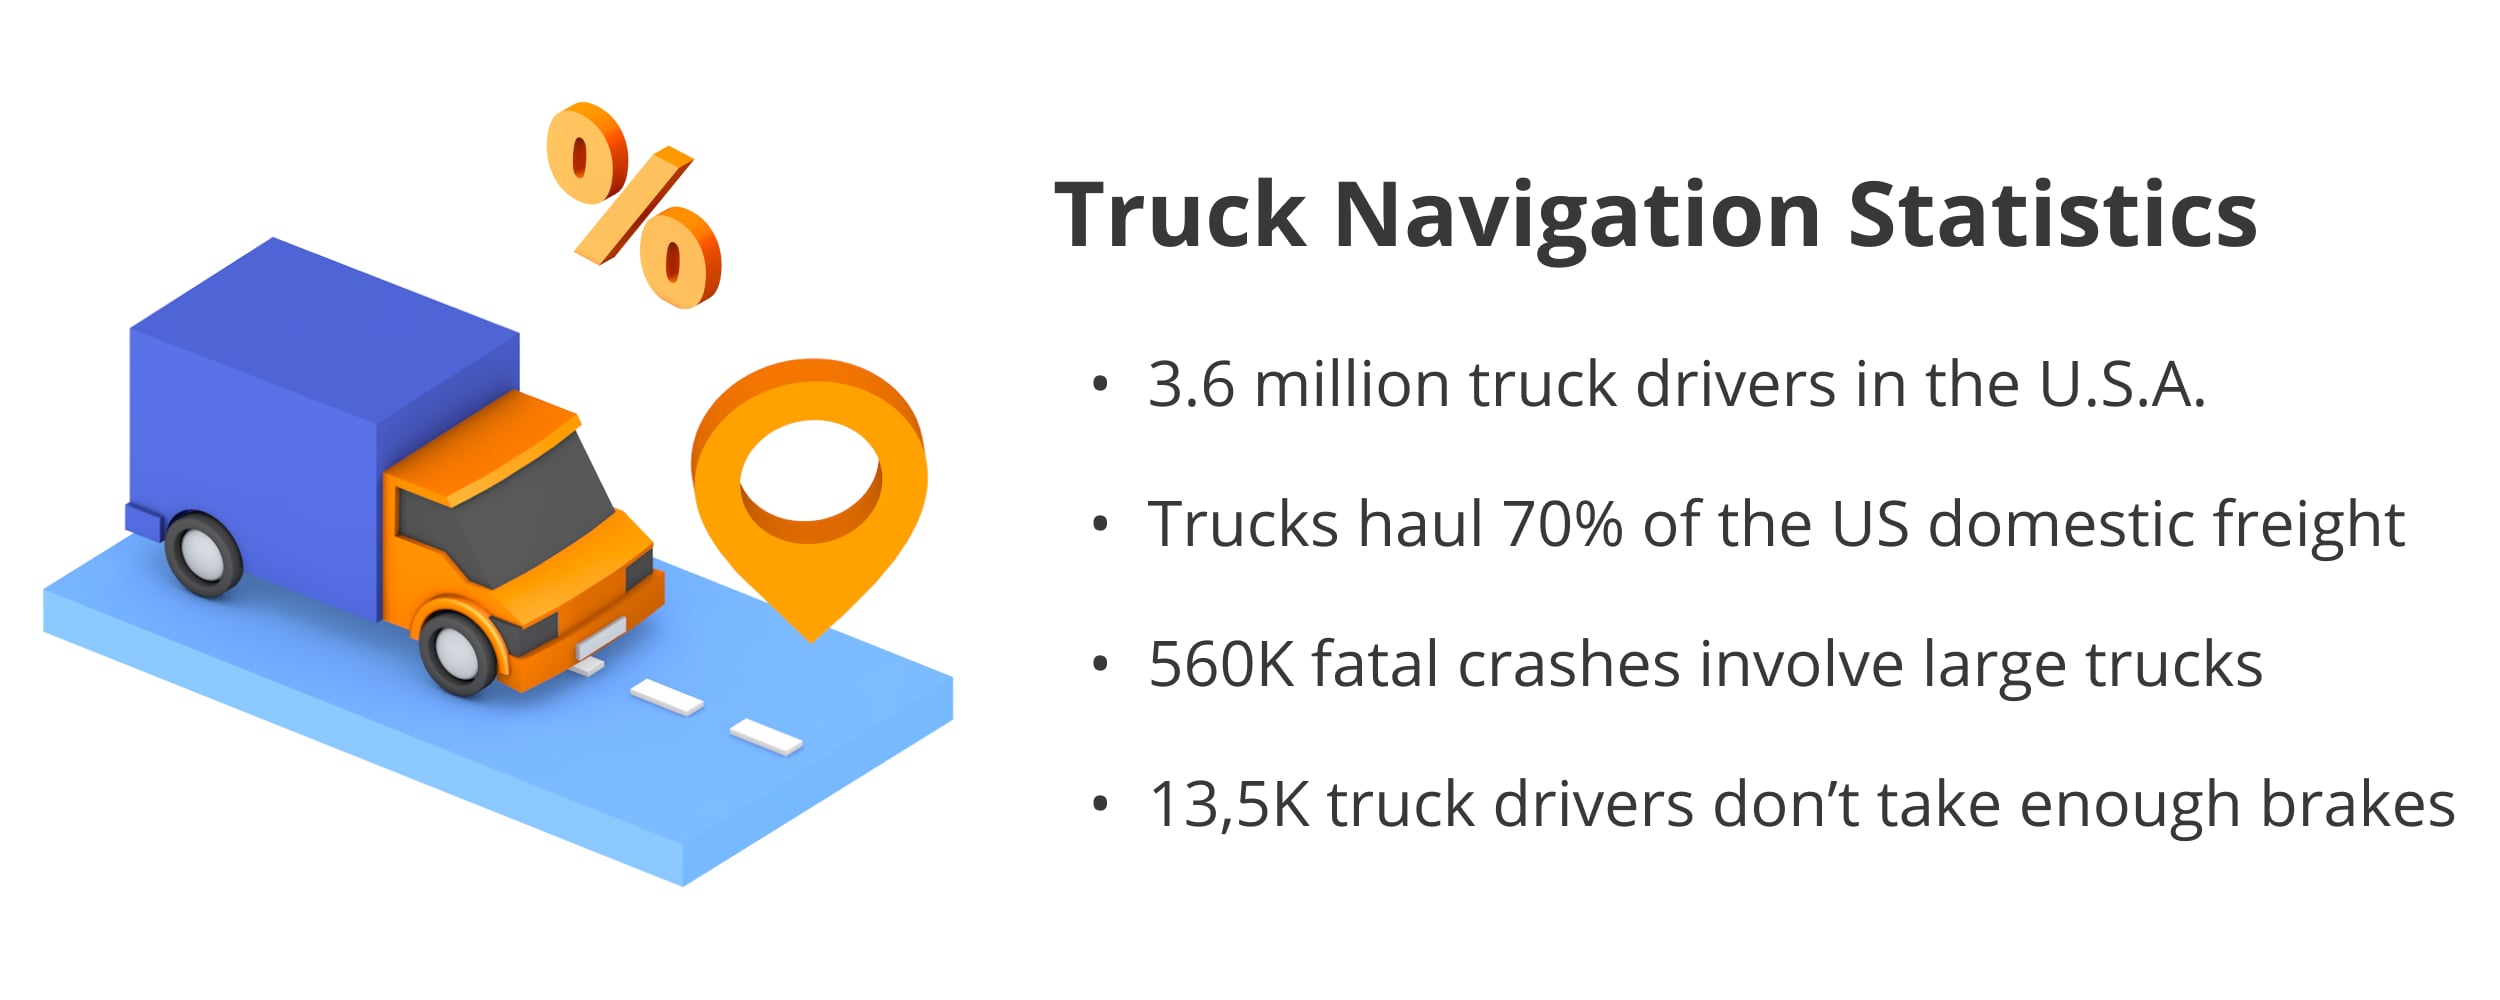 Statistics on the truck driver shortage, truck accidents, and the freight transported by trucks in the United States.